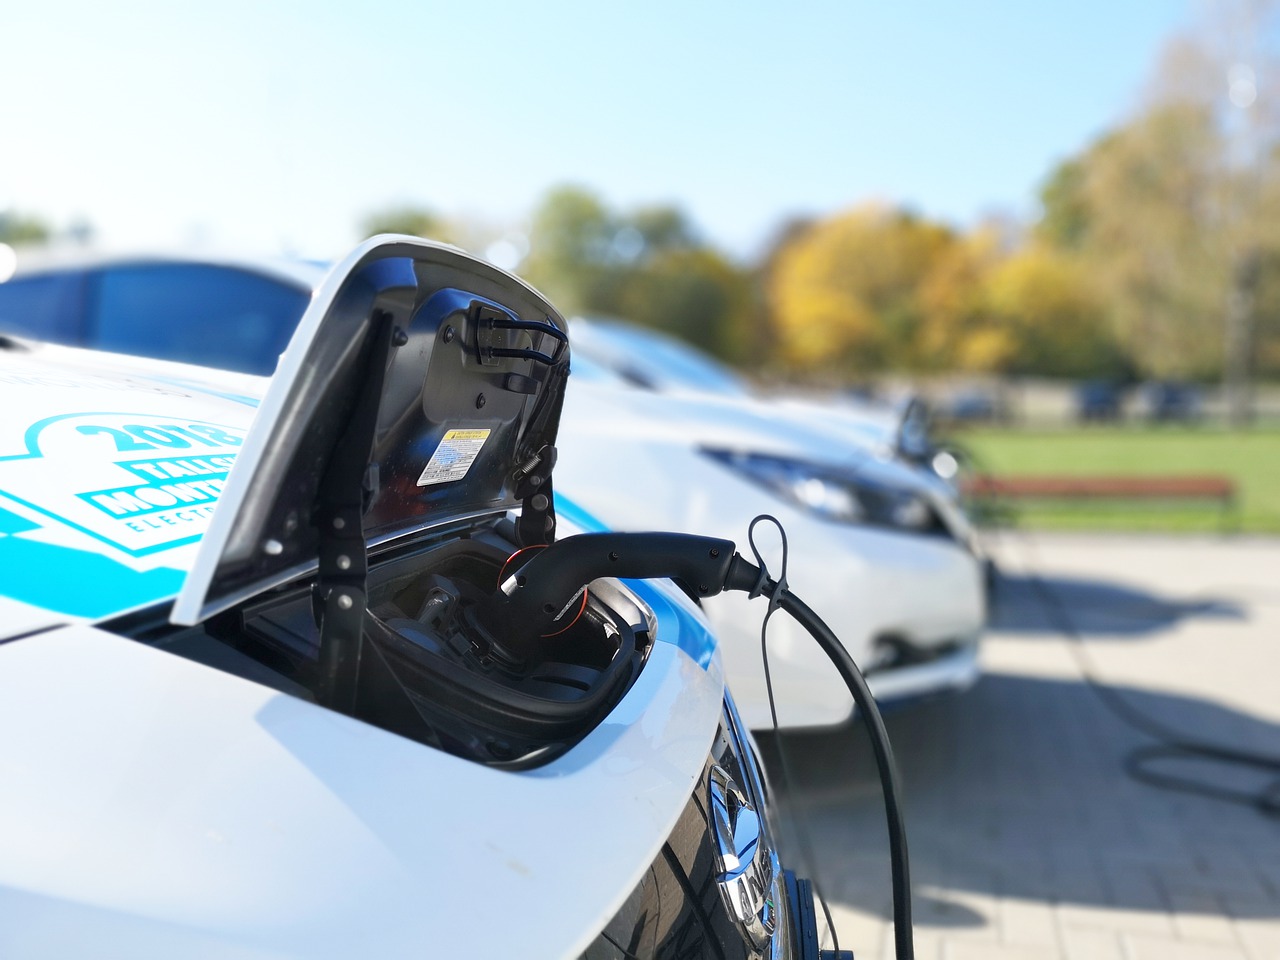 DOST to invest PHP 321 Million towards electric vehicle projects